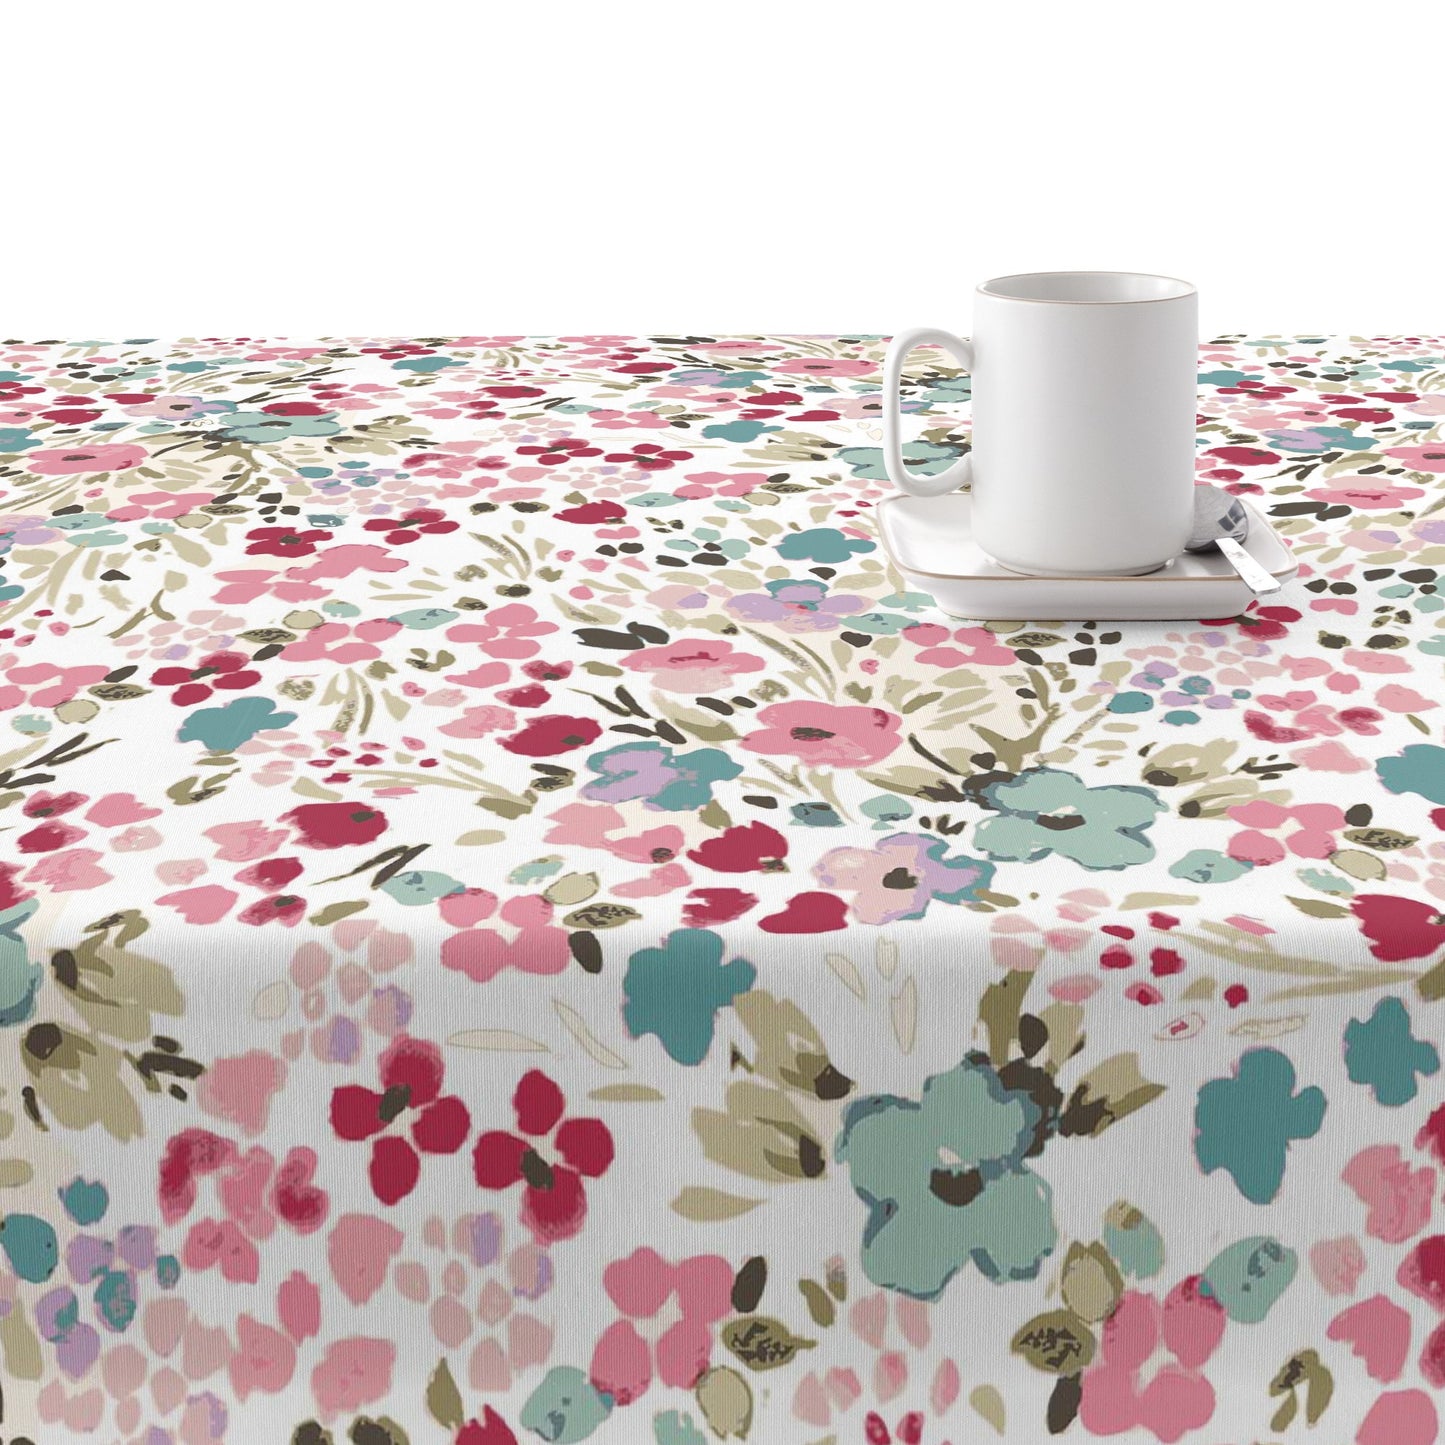 Resin stain resistant tablecloth 0120-52